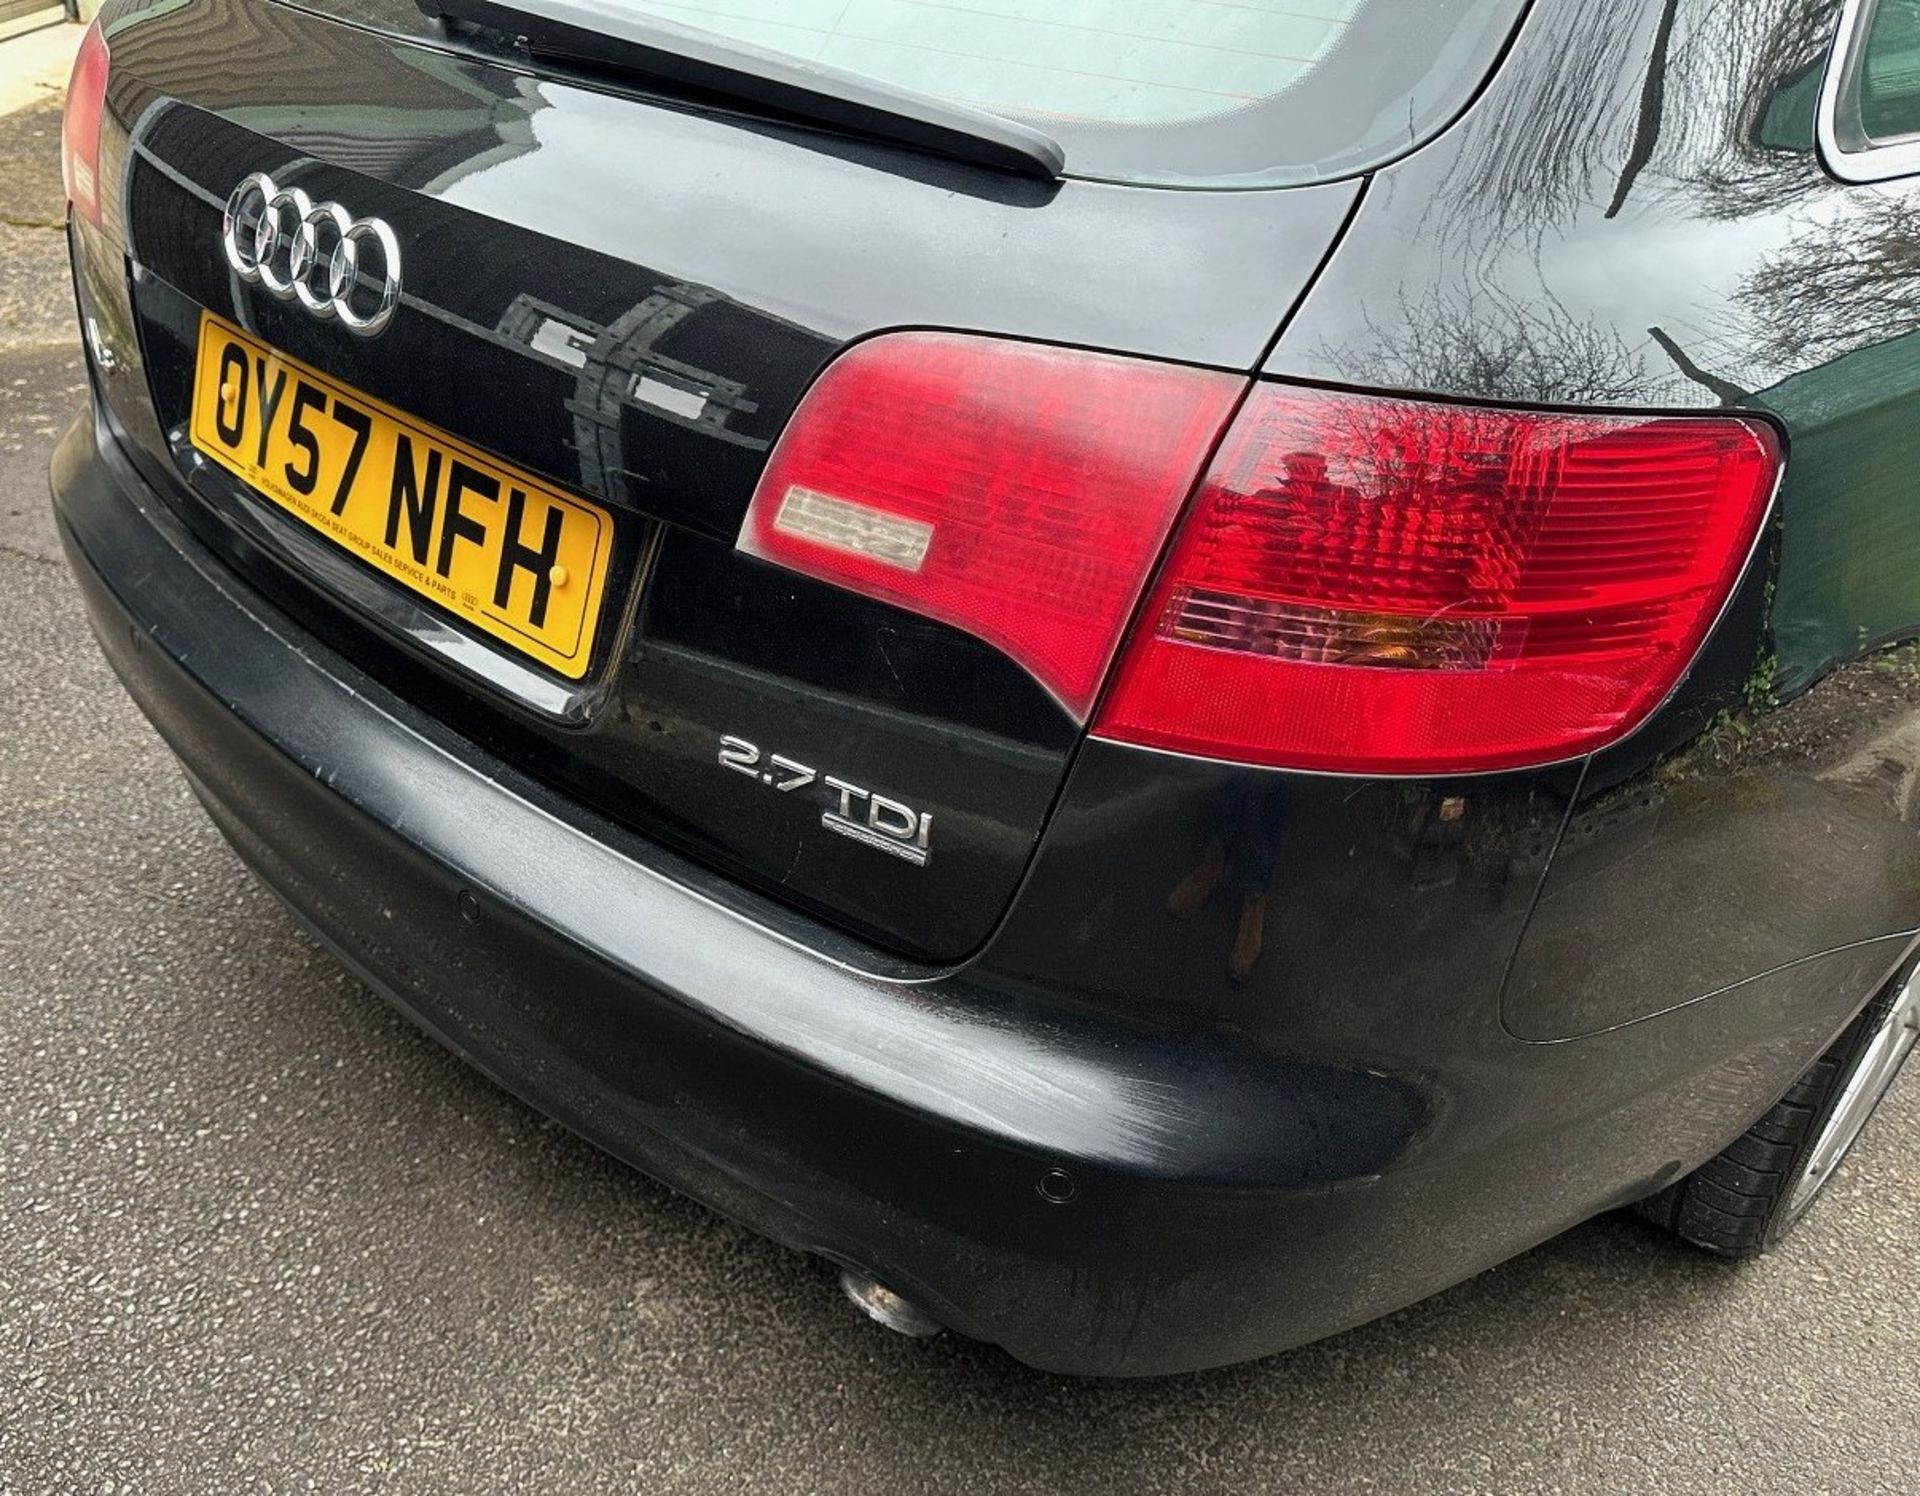 2007 Audi A6 Avant 2.7 TDi Registration number OY57 NFH Chassis number WAUZZZ4F58N016755 Engine - Image 5 of 17